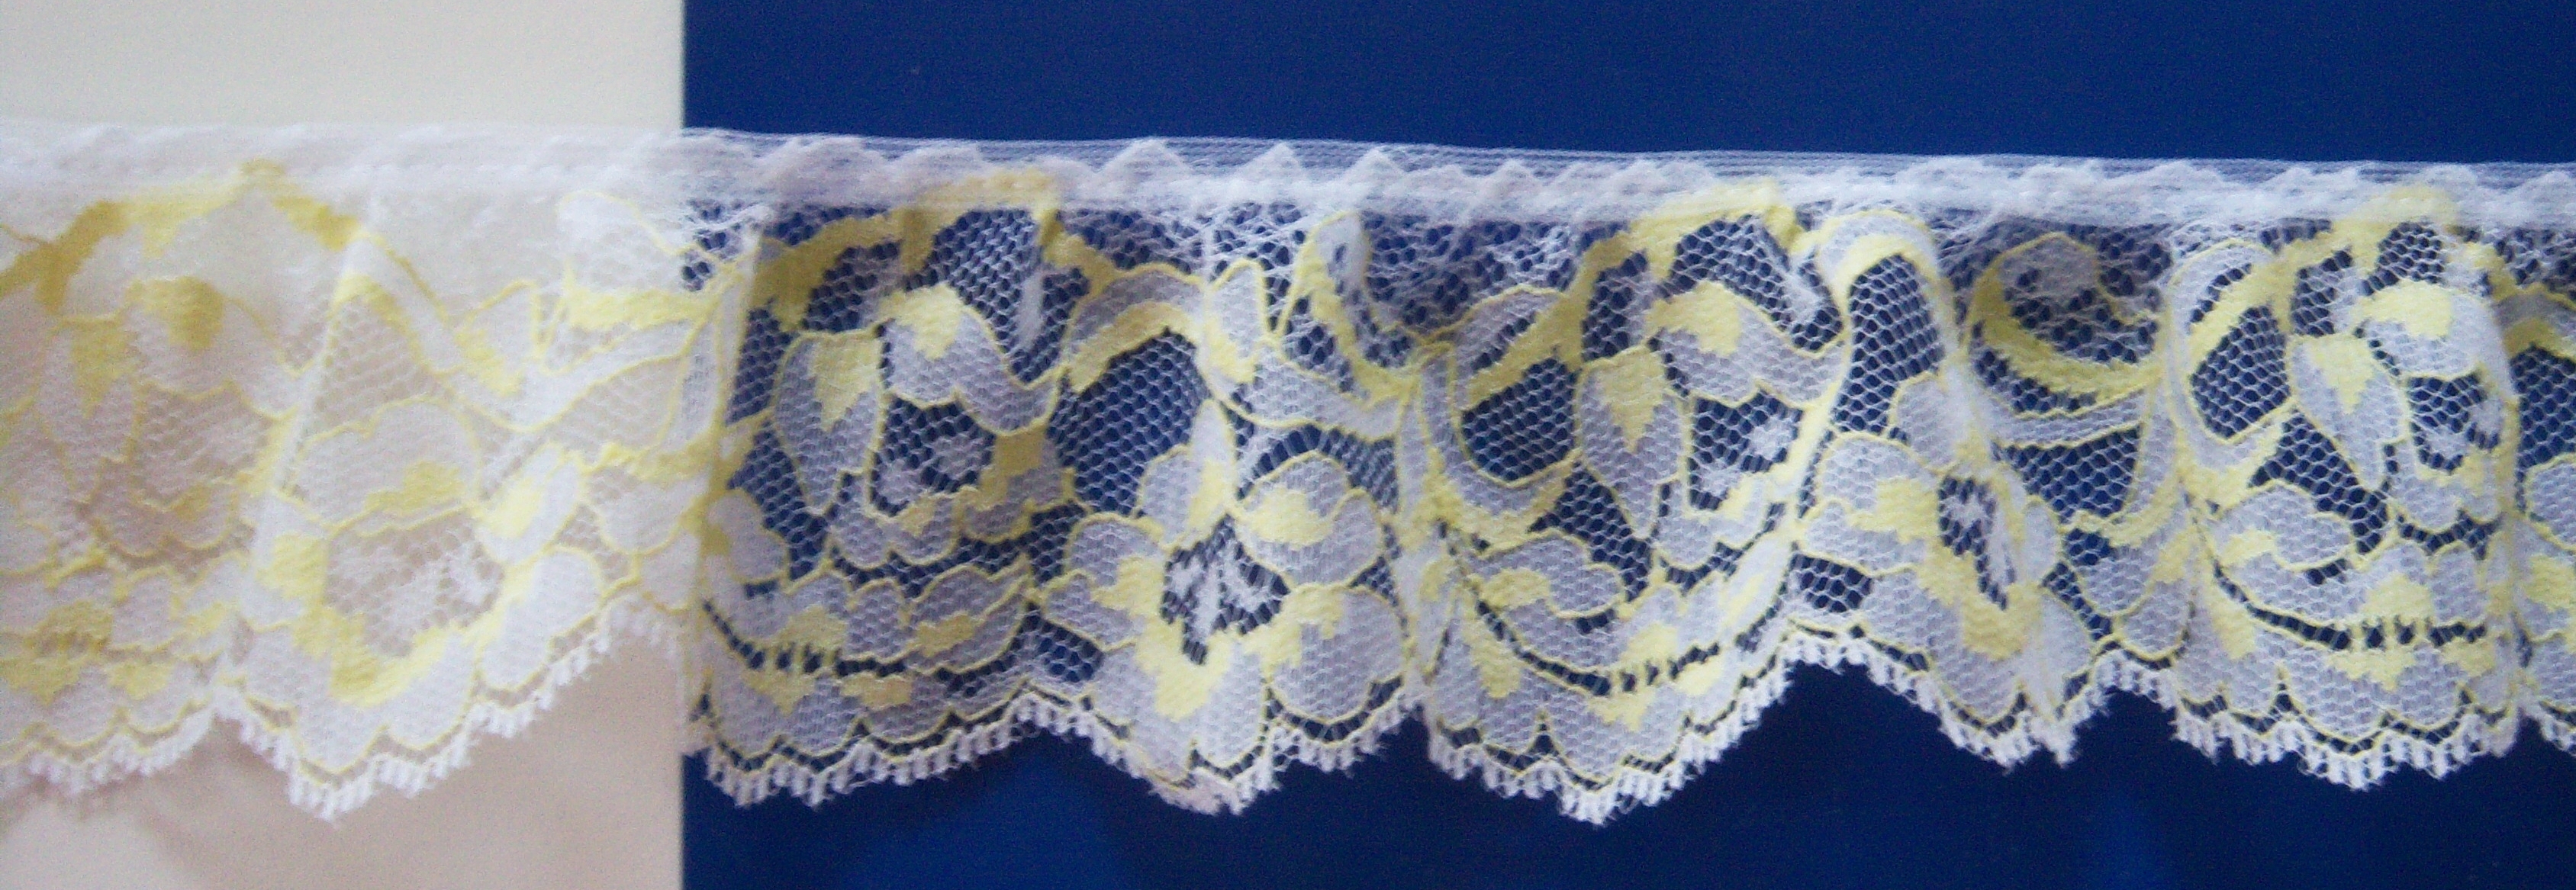 White/Yellow 2 1/2" Firm Ruffled Lace